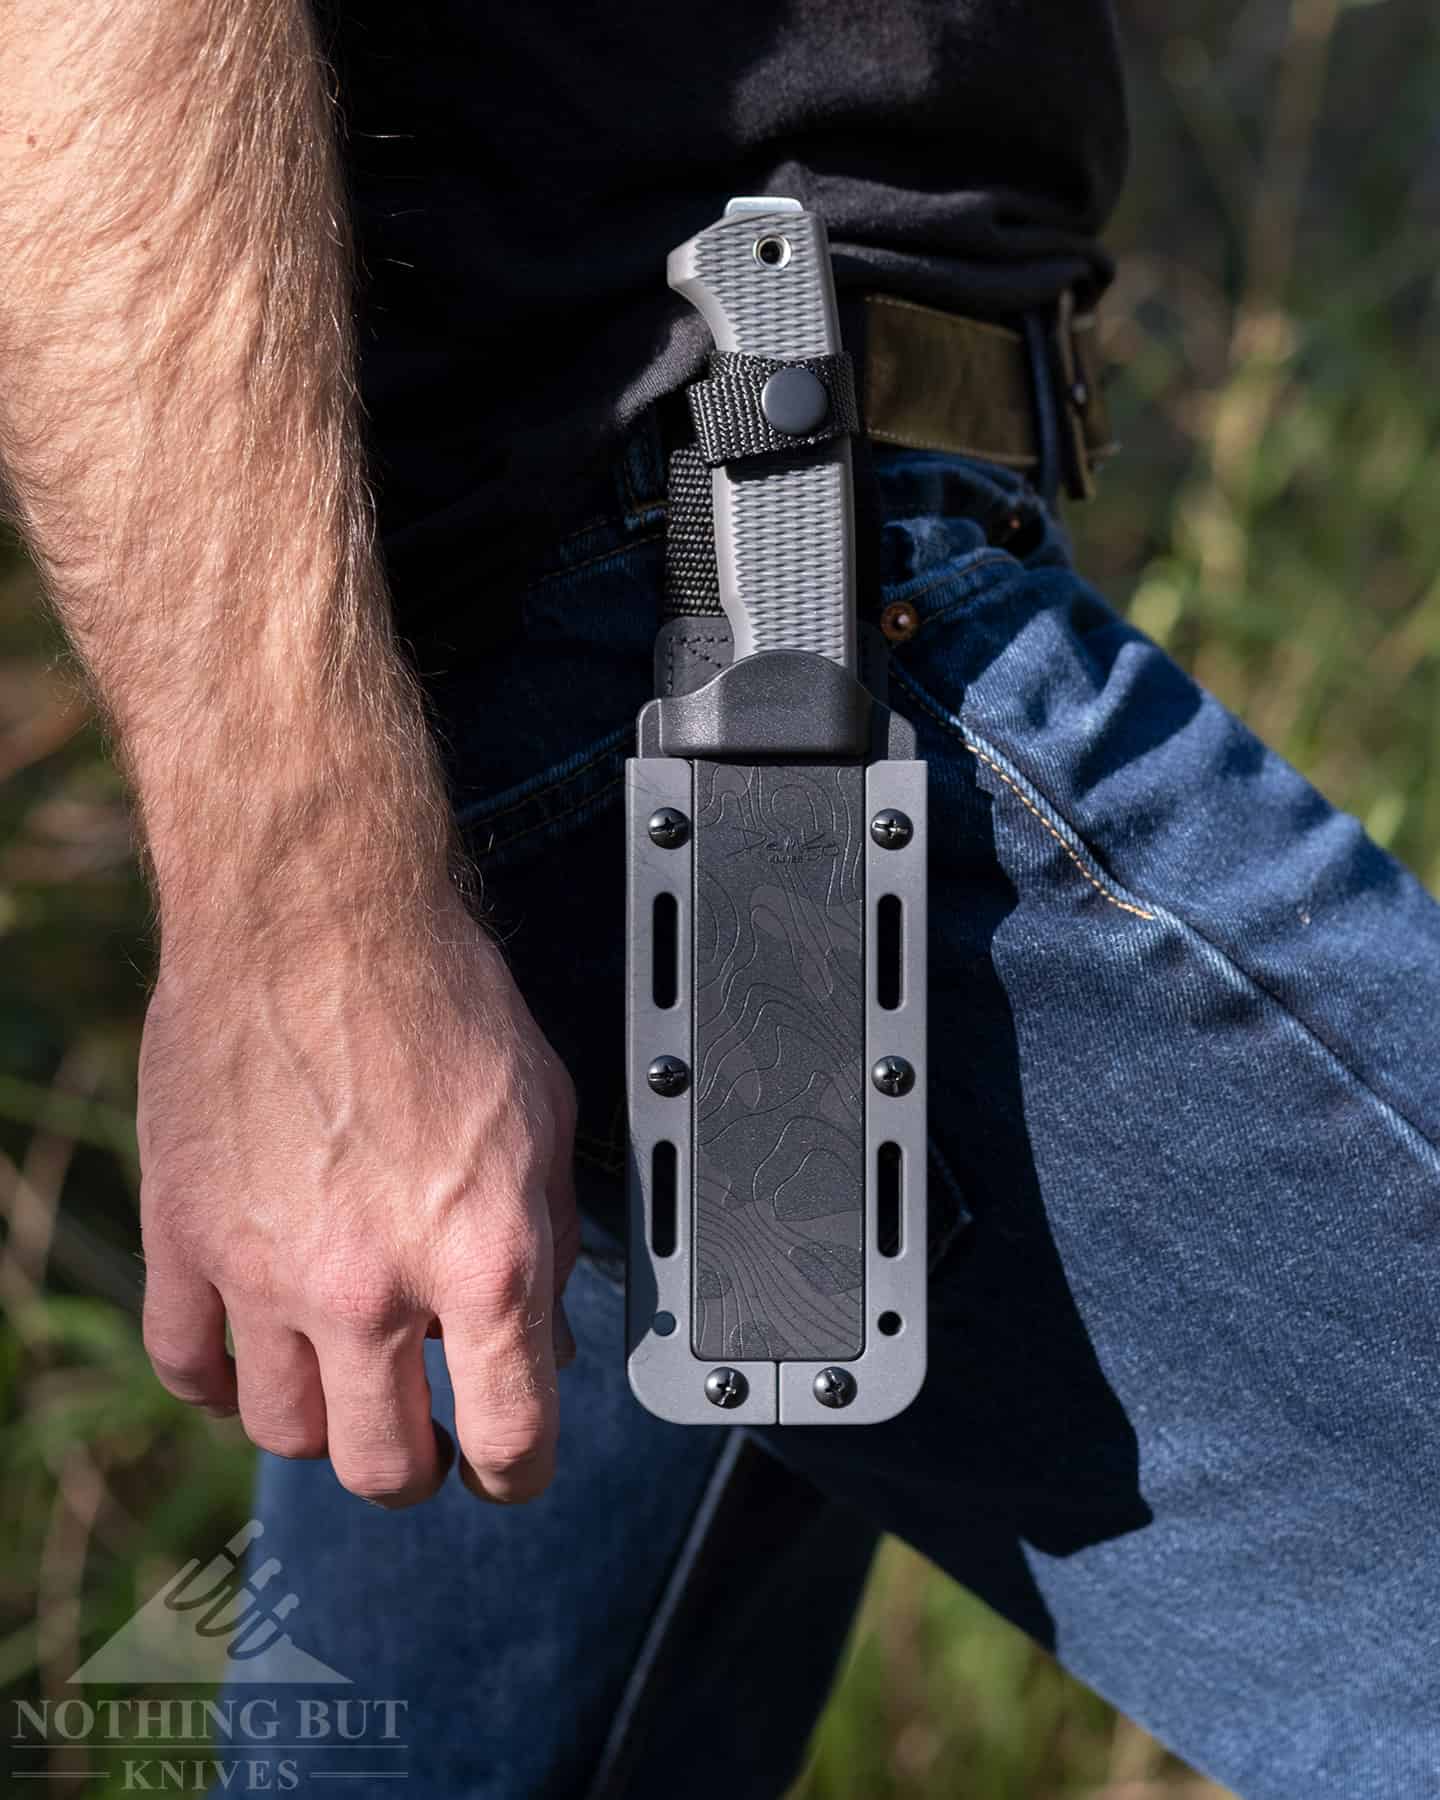 The FreeReign sheath sits low enough to be comfortable when hiking.